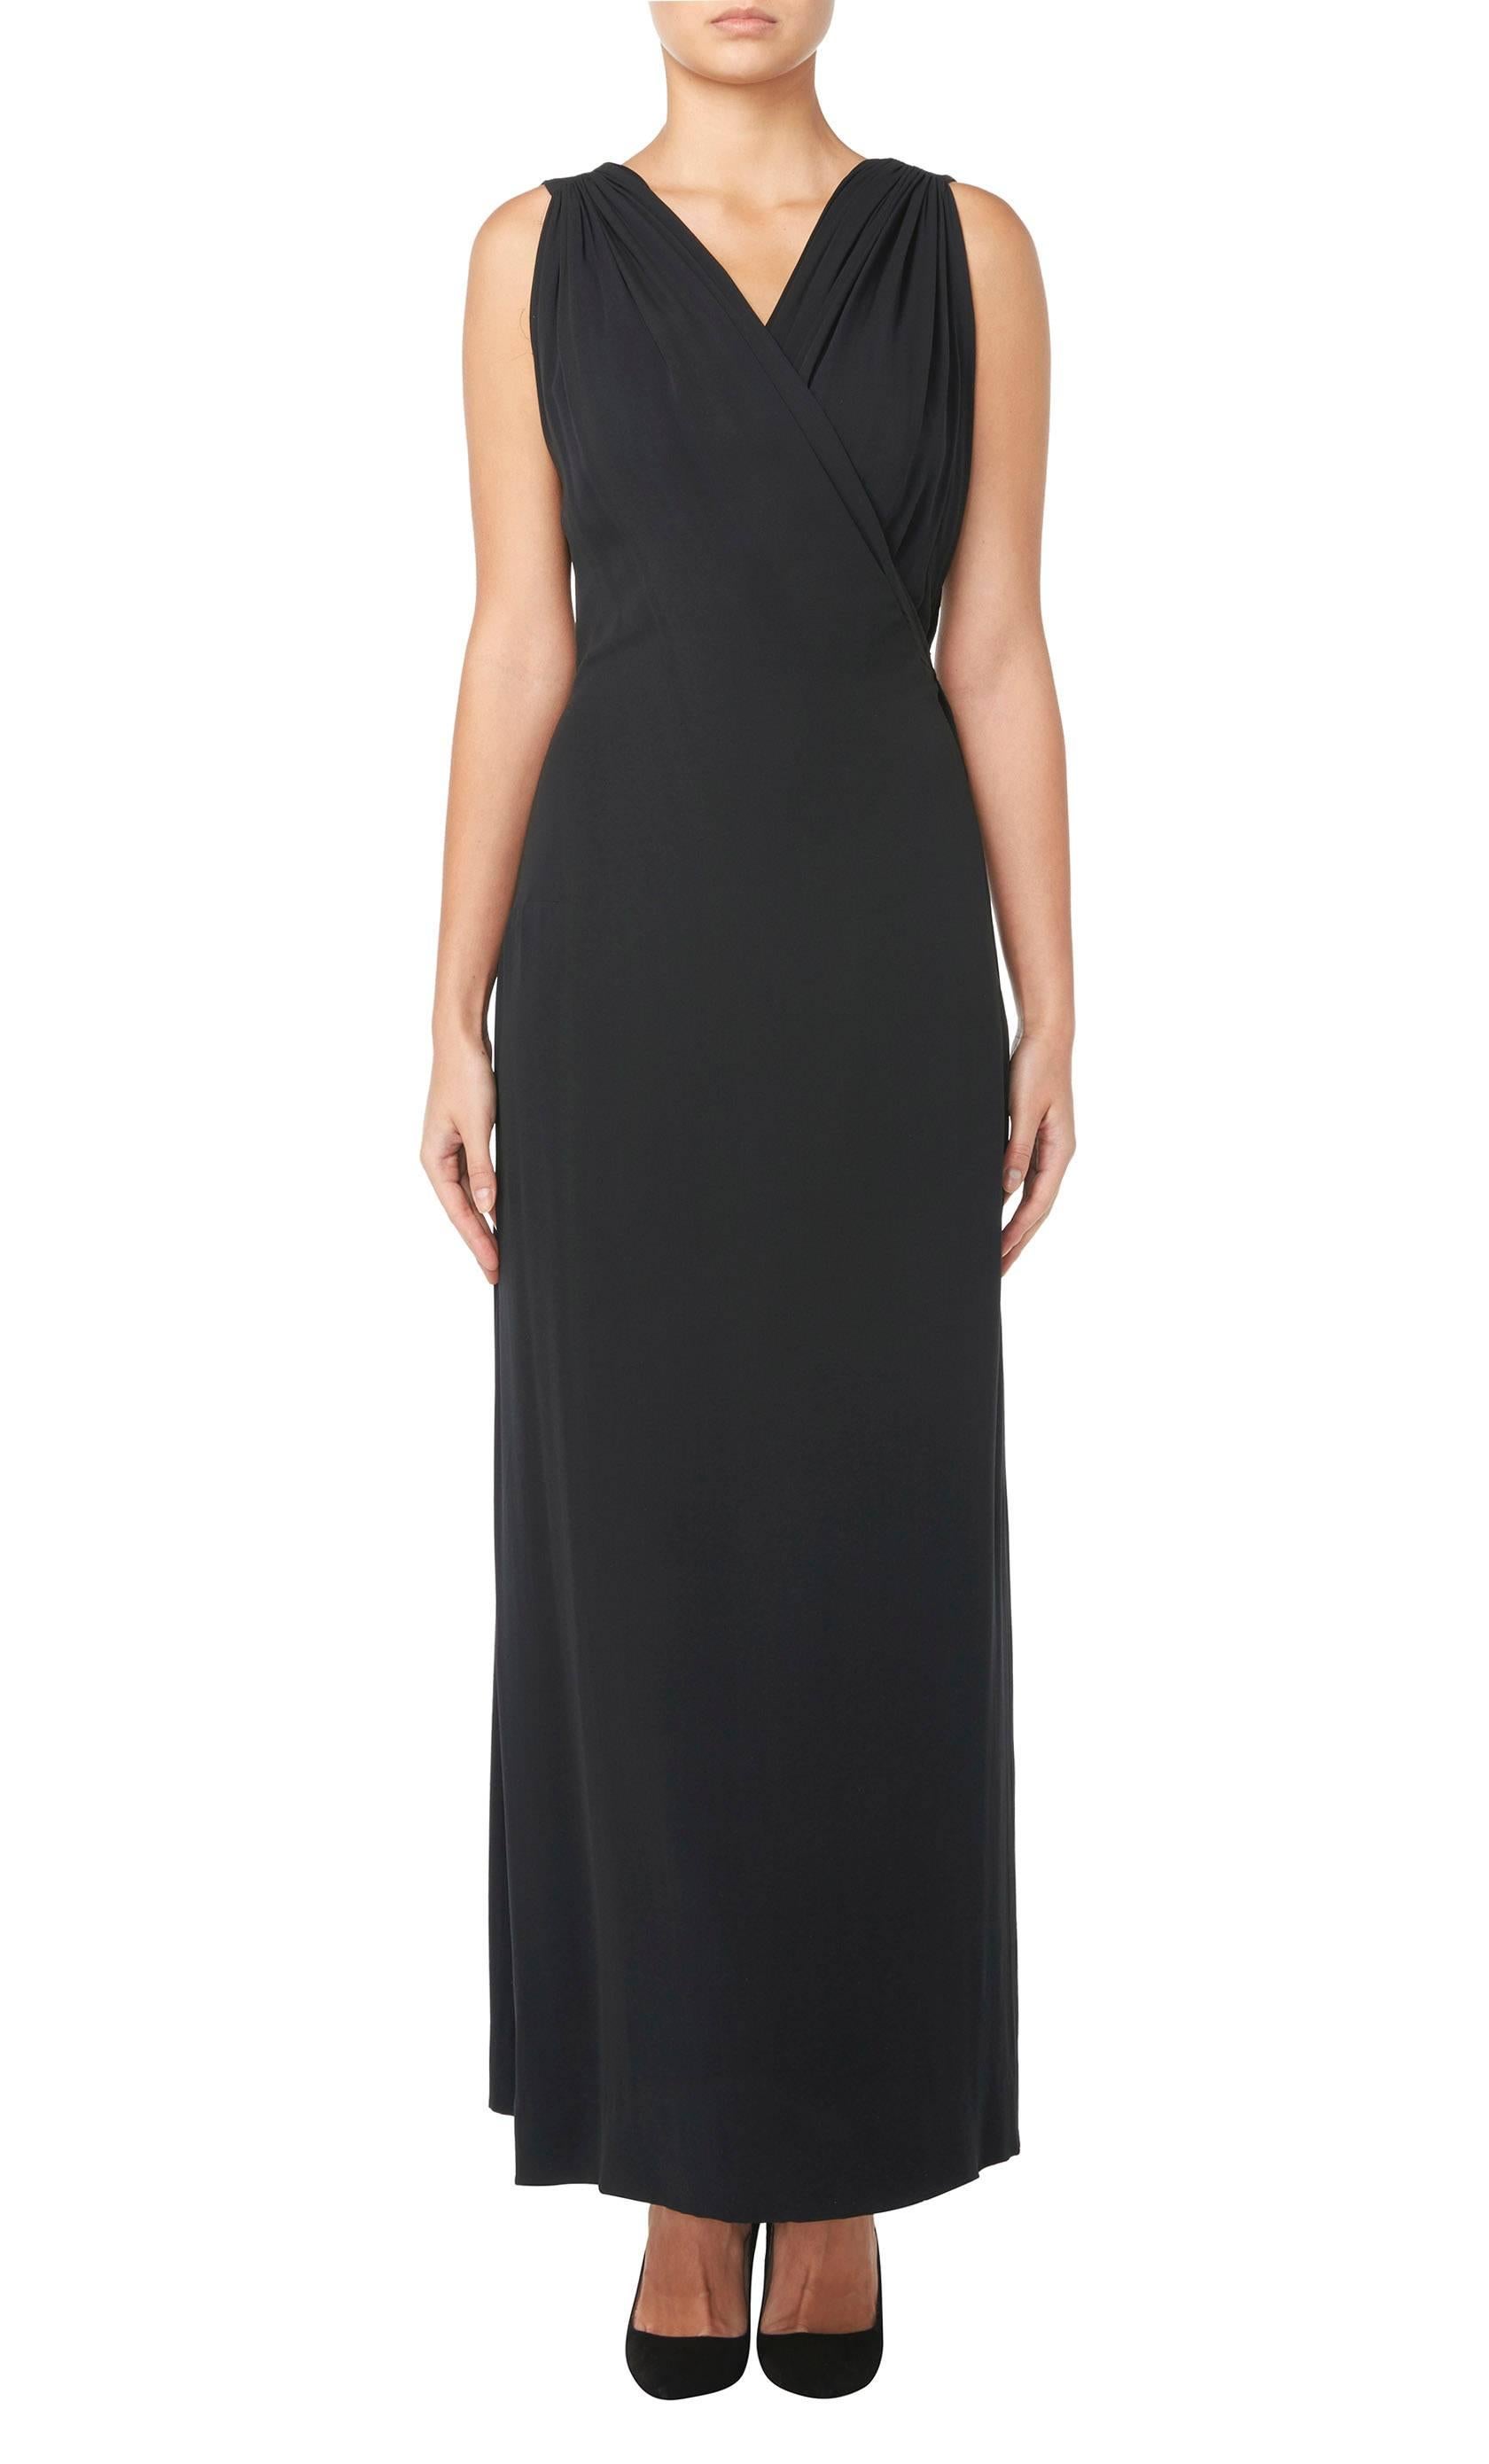 
A fabulously chic dress by Paquin, the legendary French haute couture house, this is a wonderfully wearable dress ideal for a Black Tie event. Crafted in black silk crepe, the dress is a beautifully-cut, well-shaped piece of haute couture sold